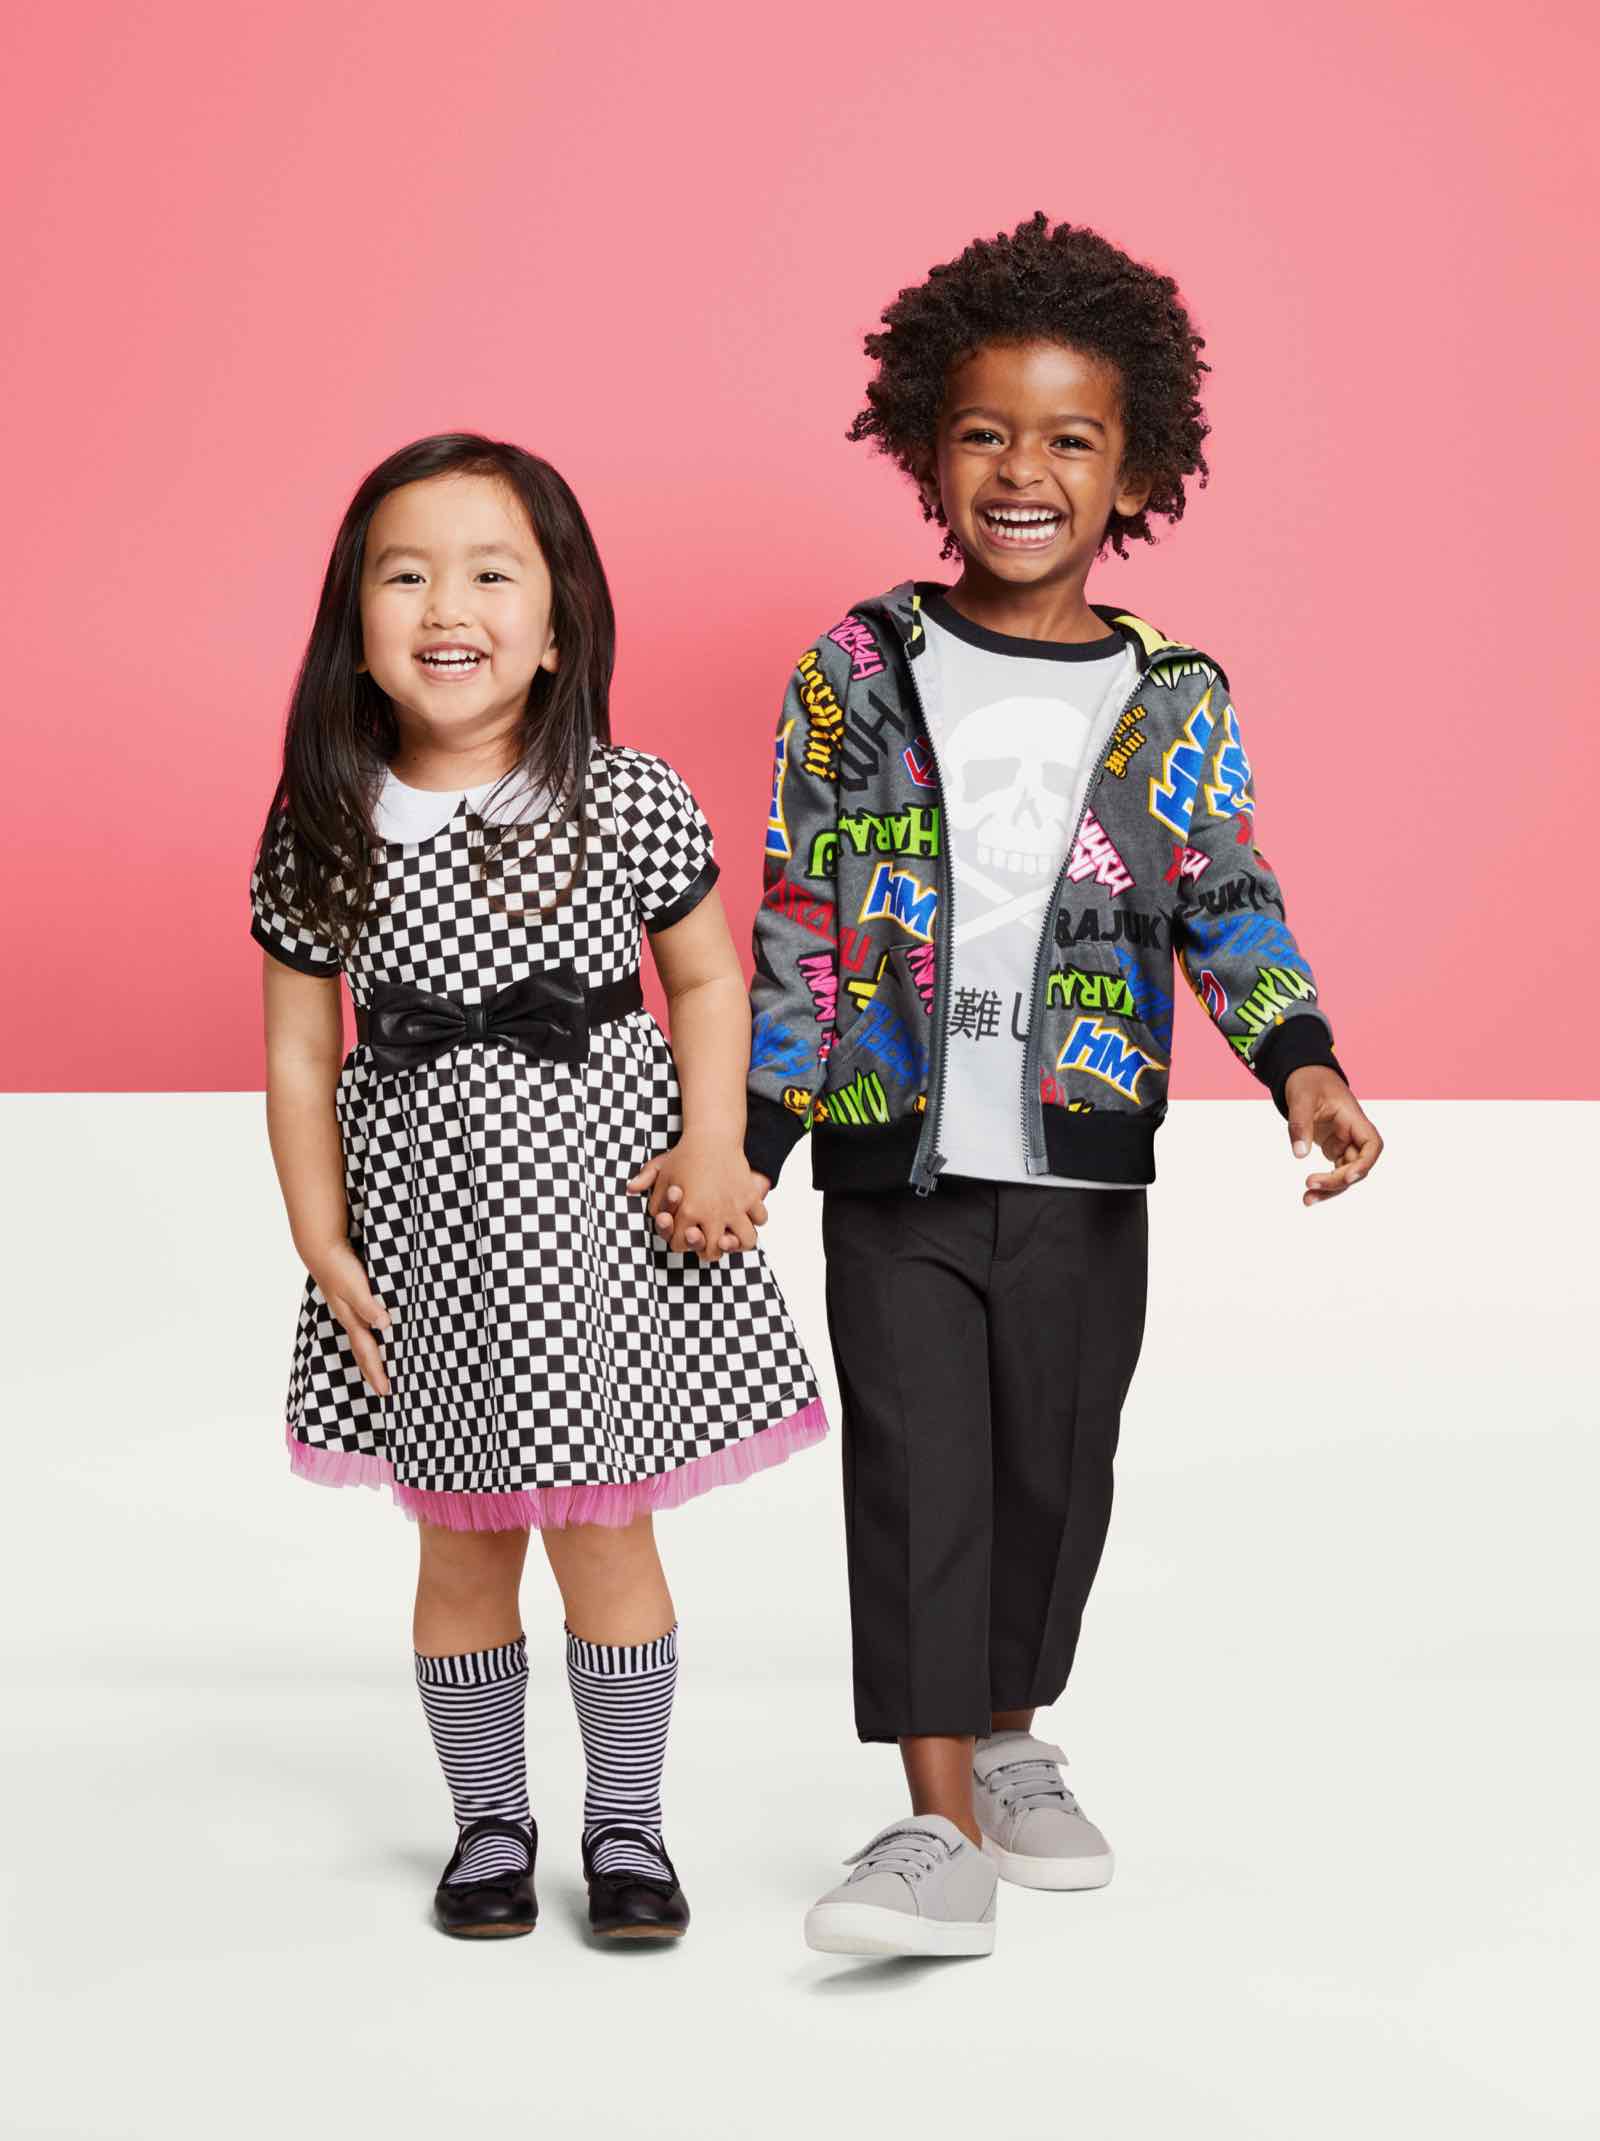 Target's 20th Anniversary Collection lookbook